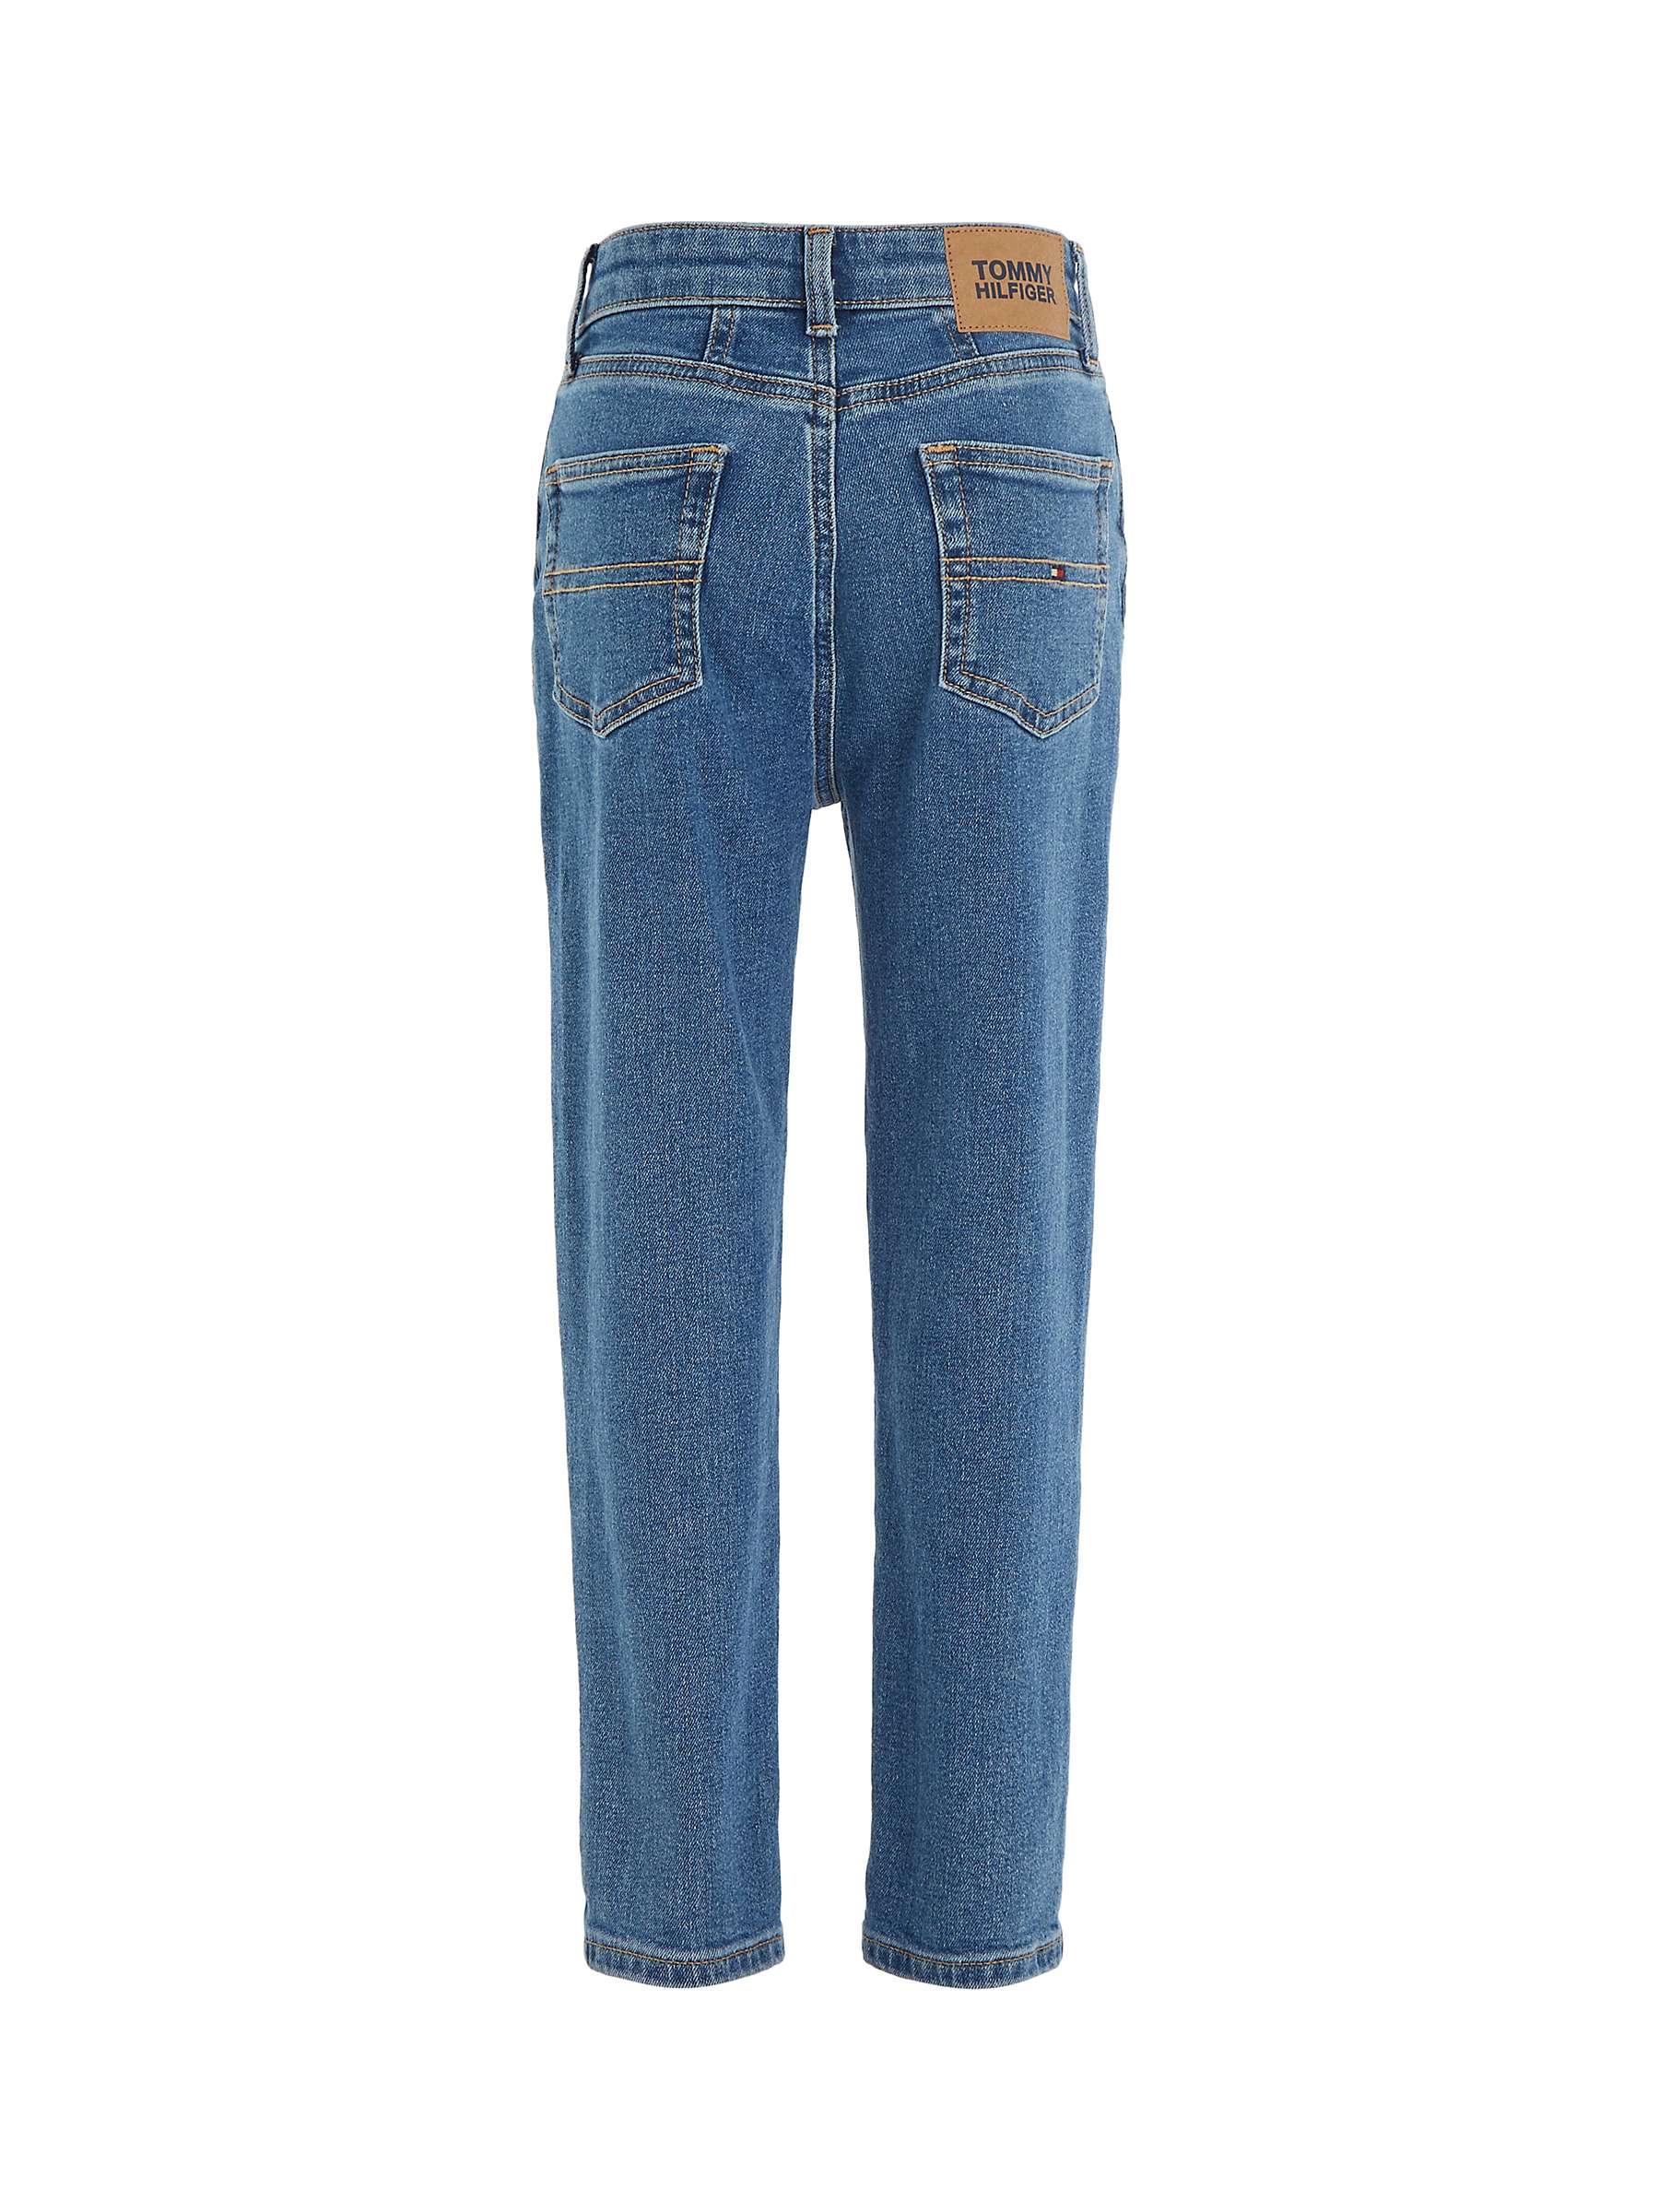 Buy Tommy Hilfiger Kids' High Rise Tapered Jeans, Midused Online at johnlewis.com